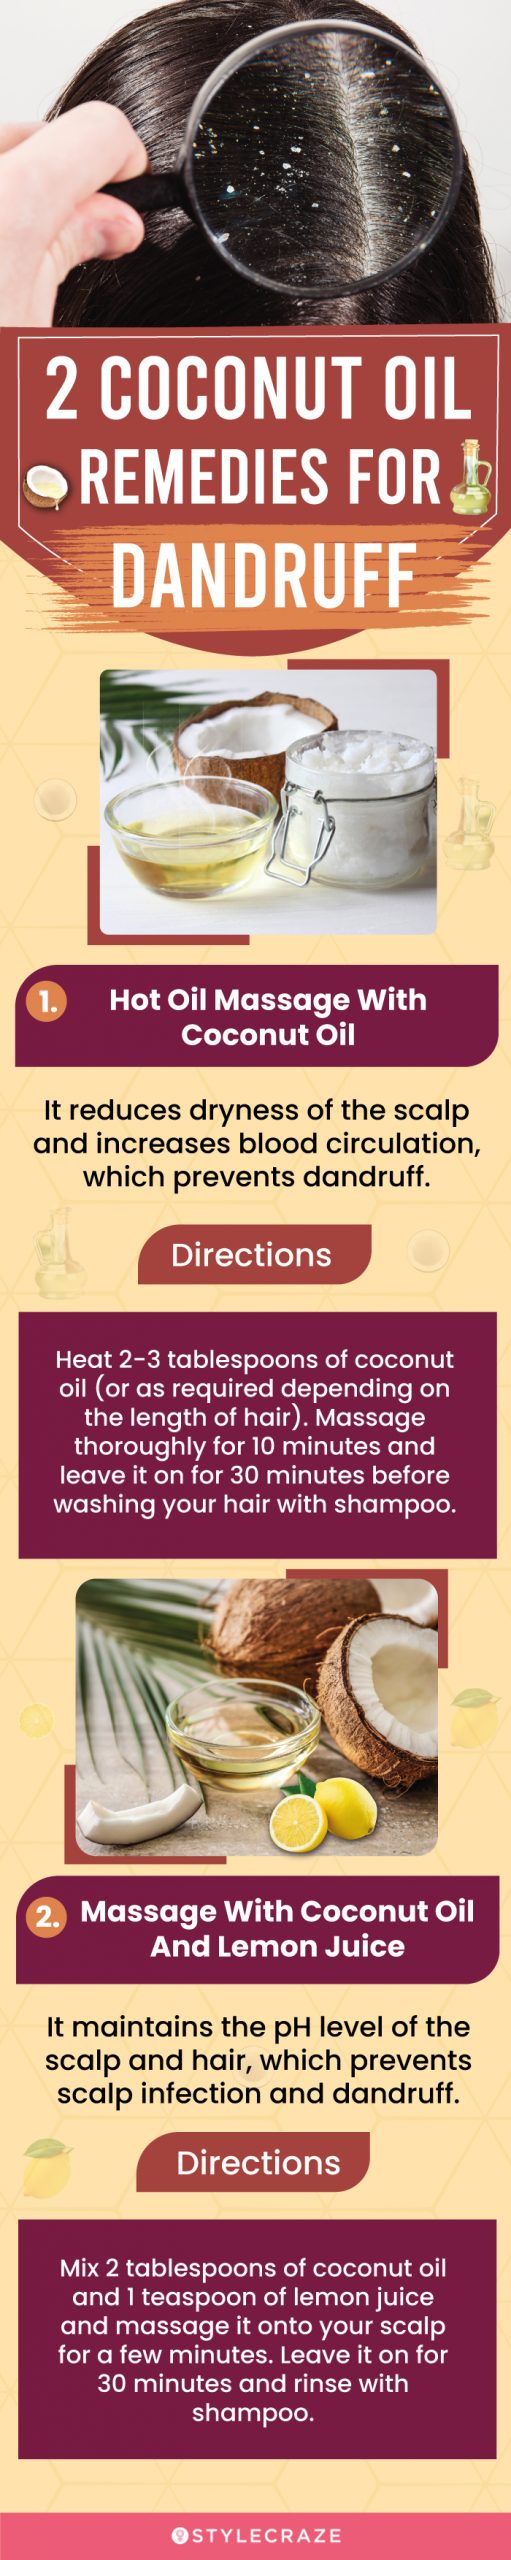 How To Use Coconut Oil For Dry Scalp And Dandruff  